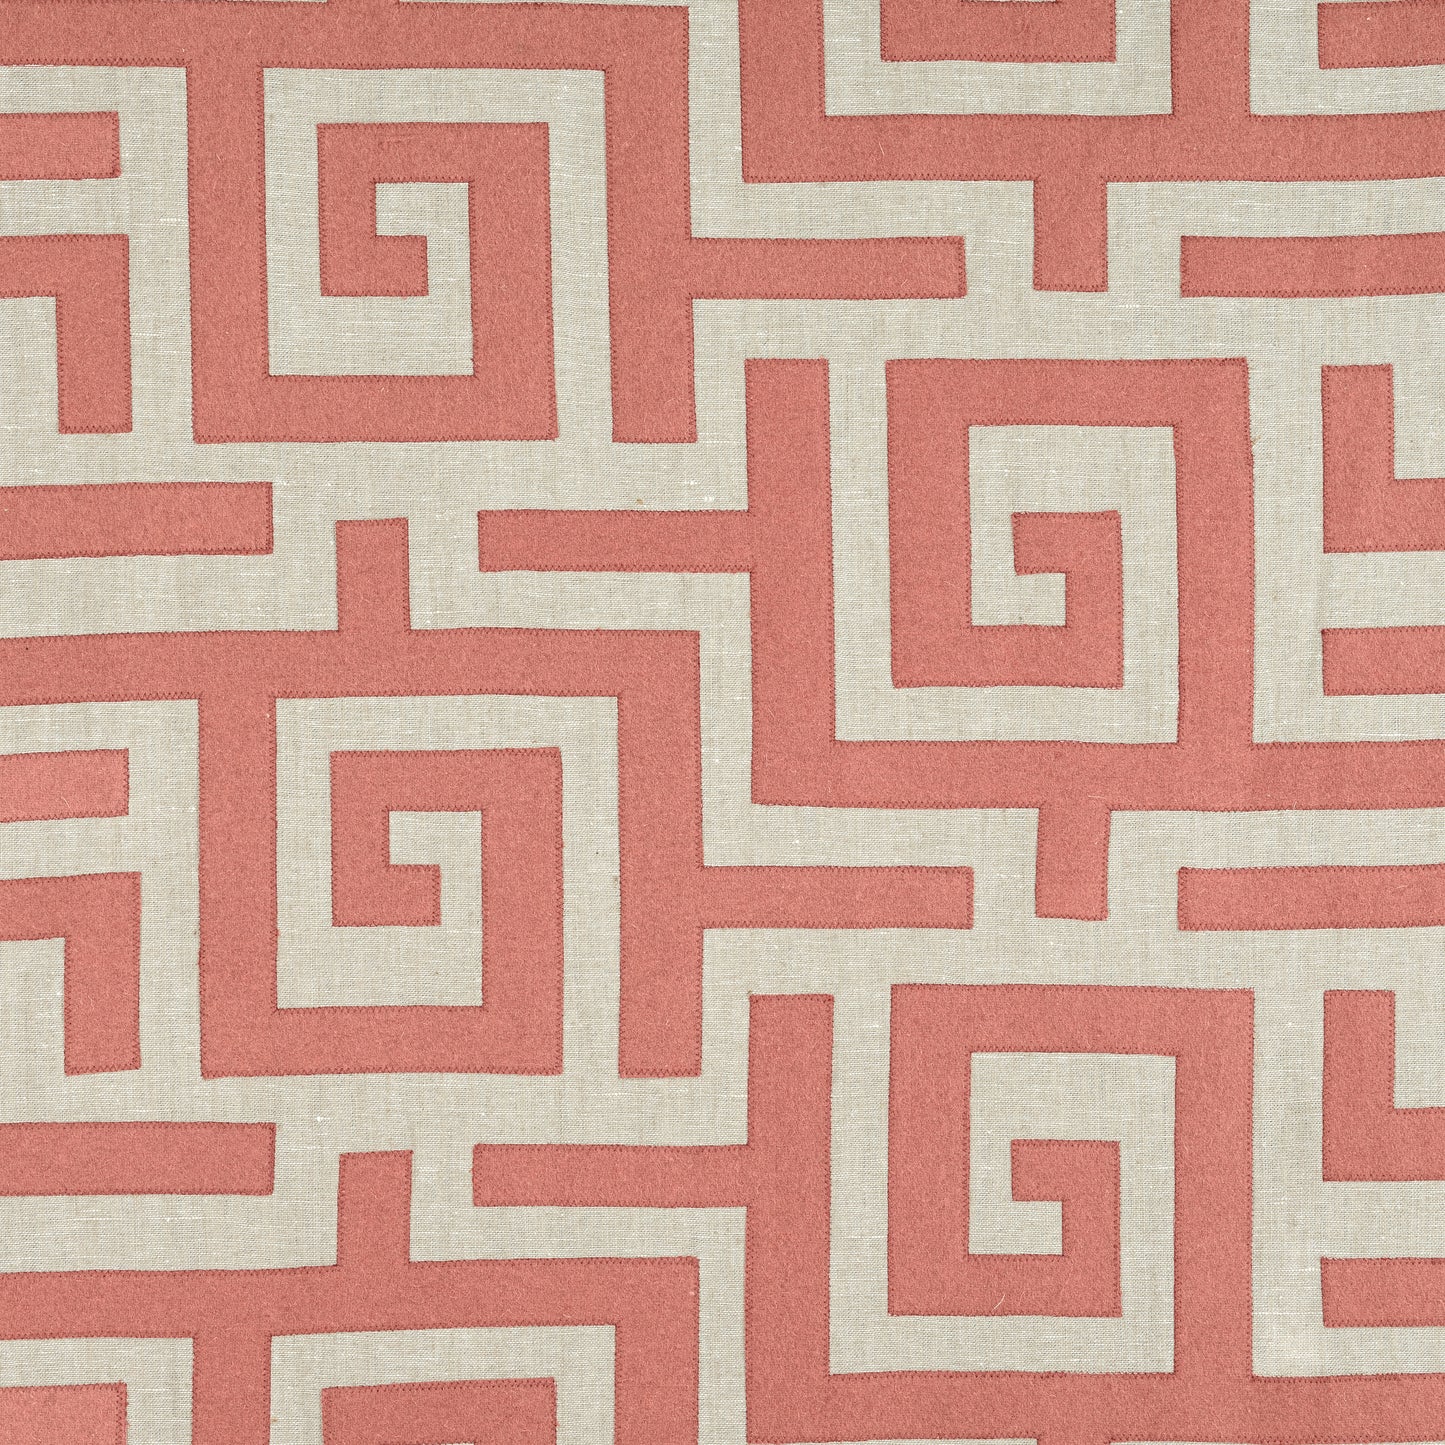 Purchase Thibaut Fabric Item# W713223 pattern name Tulum Applique color Coral on Natural